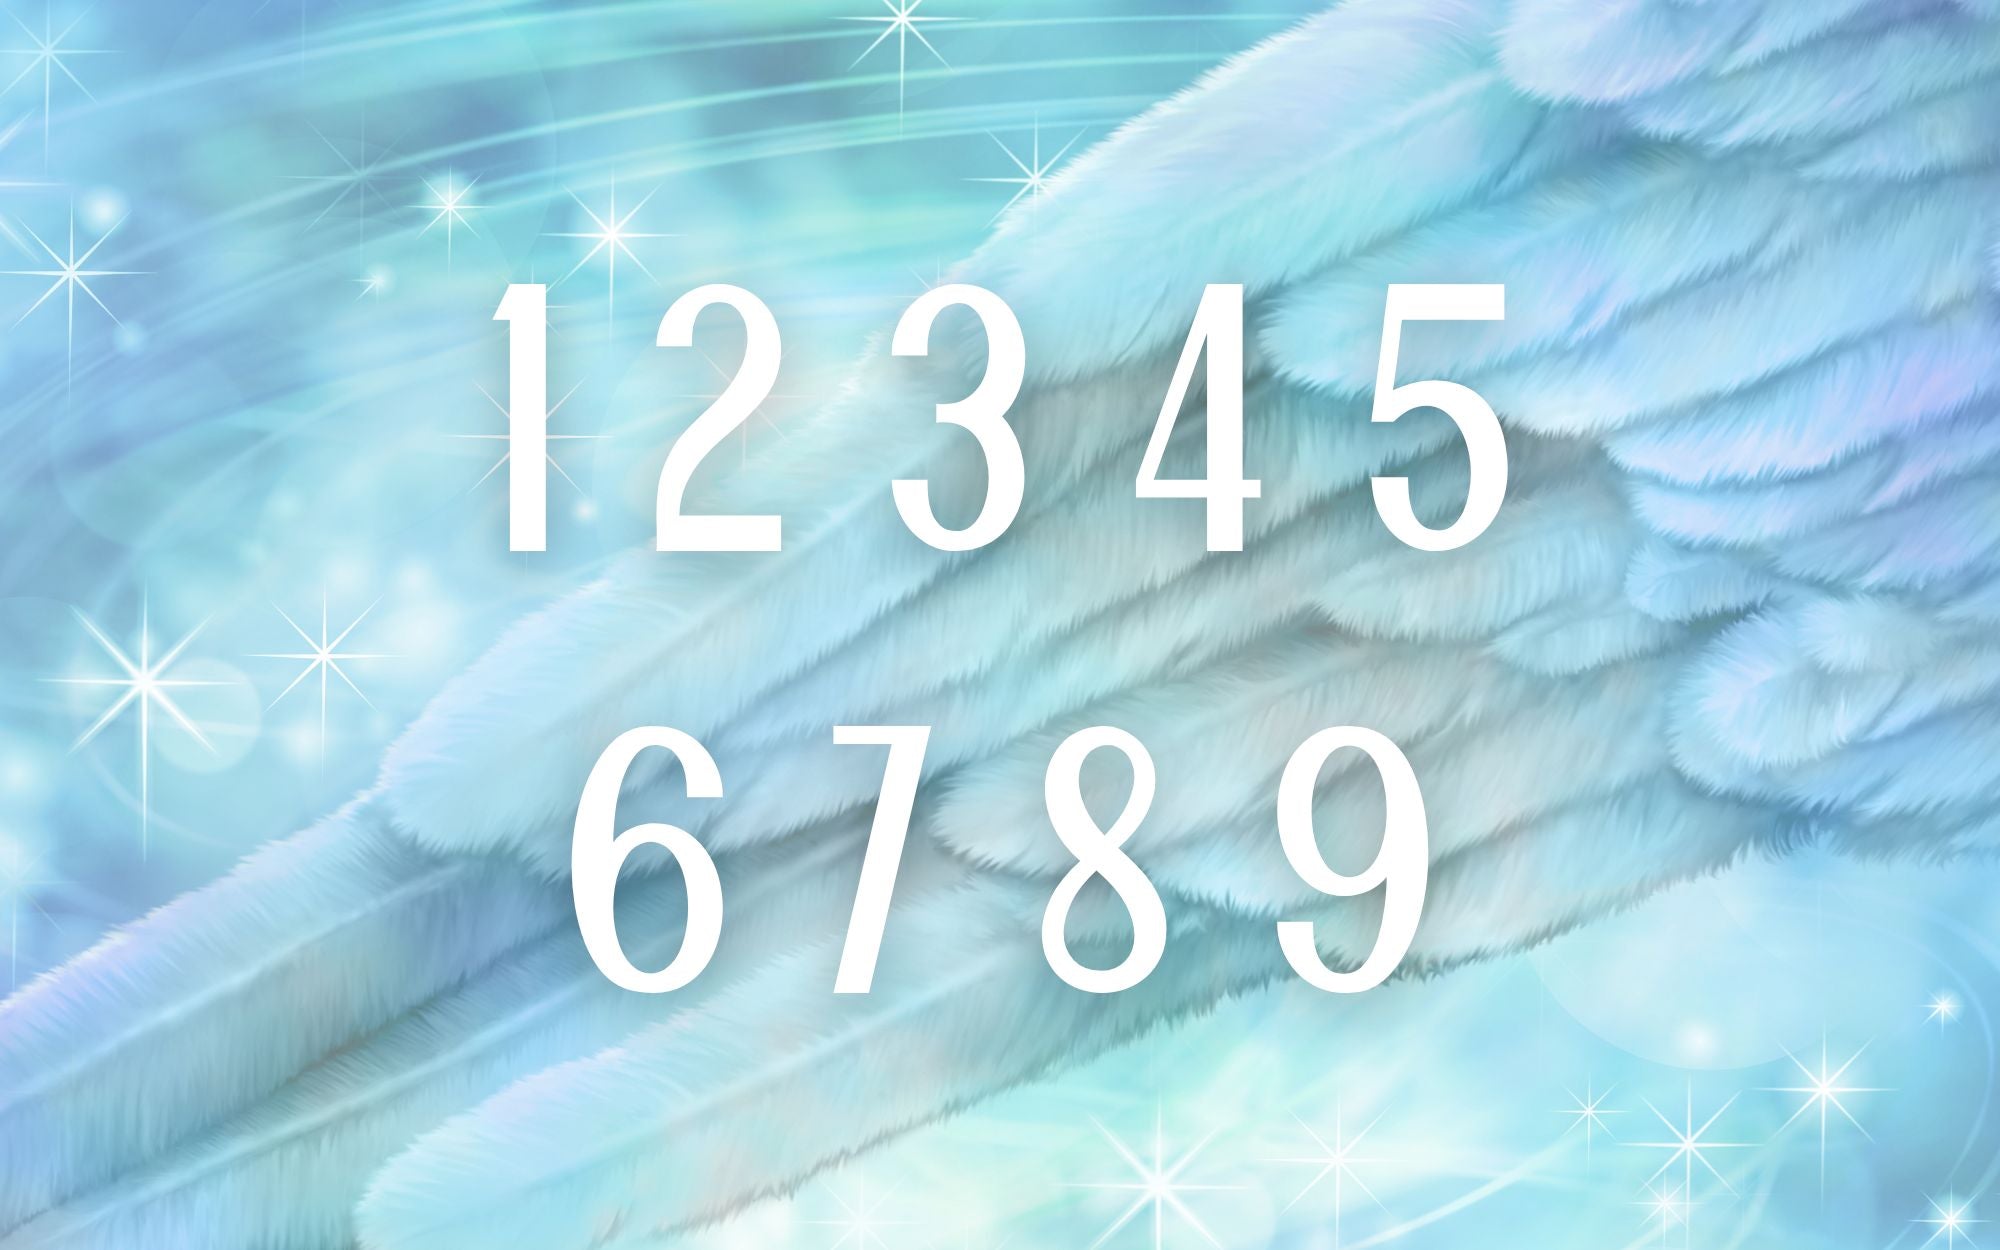 what is my angel number - meaning